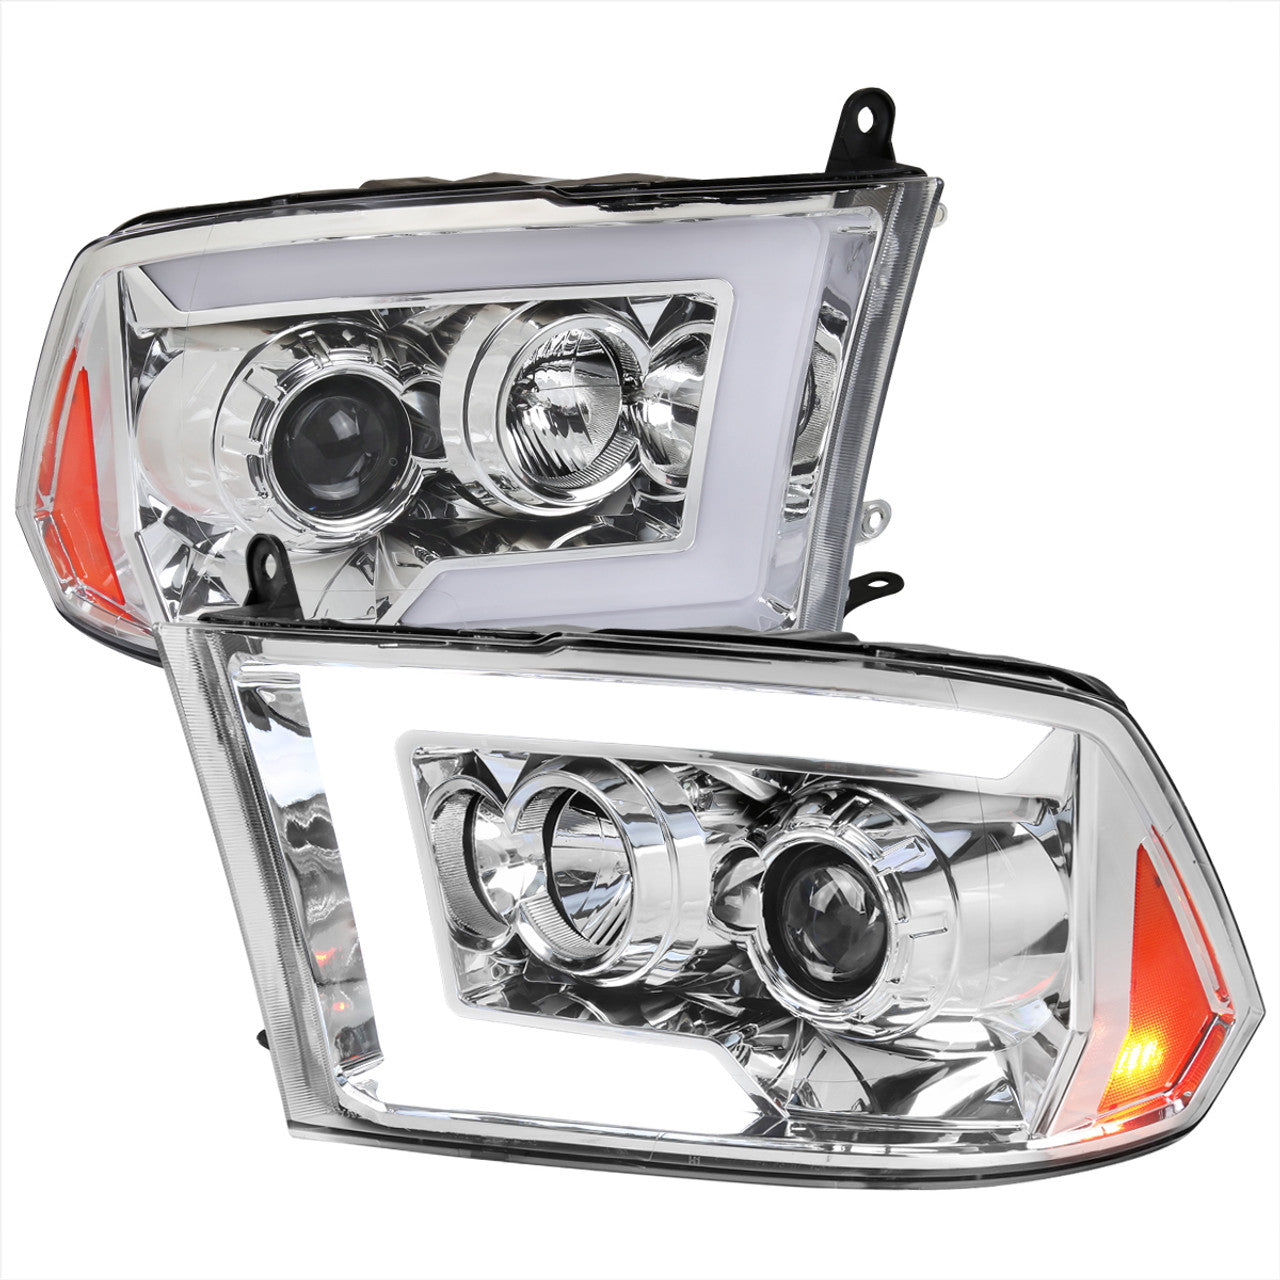 2009-2018 Dodge RAM 1500 / 2019-2021 RAM Classic / 2010-2018 RAM 2500 3500 Switchback Sequential LED C-Bar Projector Headlights (Chrome Housing/Clear Lens)